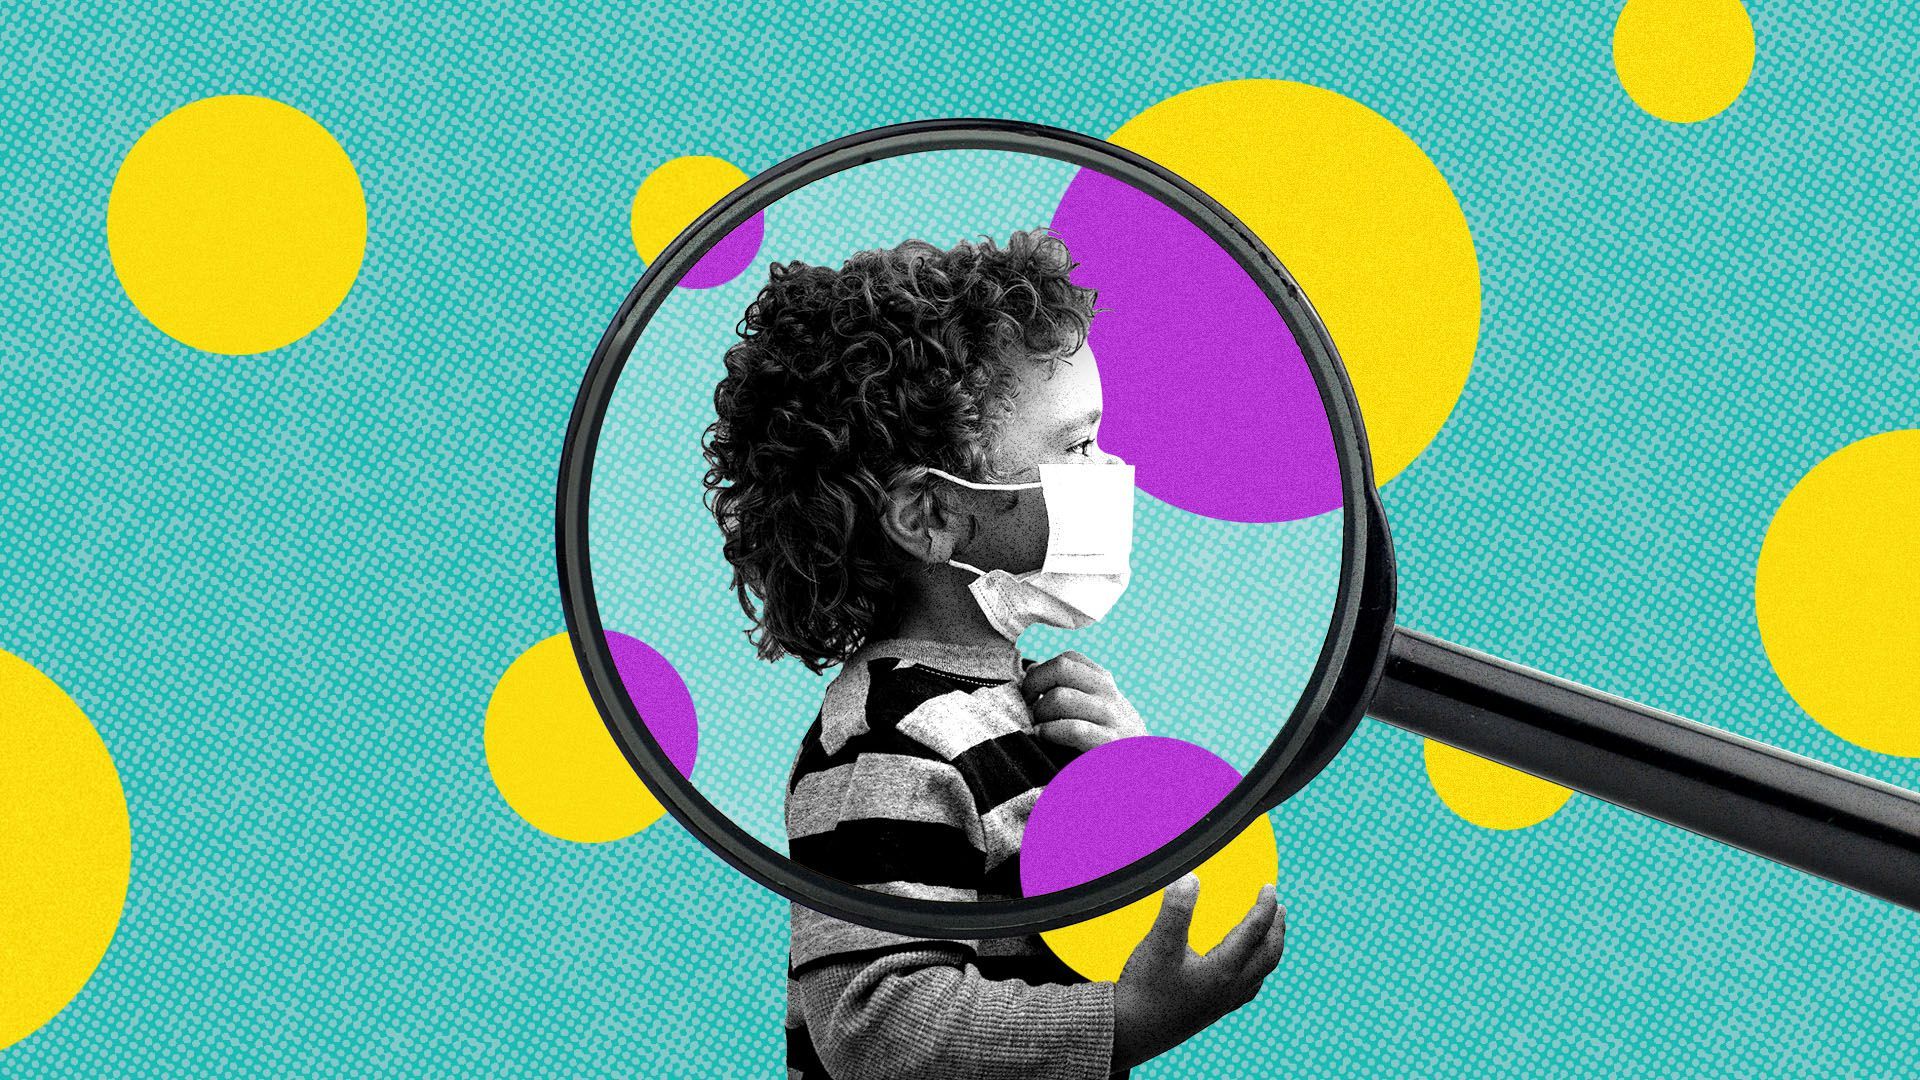 Illustration of a child in a medical mask under a magnifying glass surrounded by circles of different colors